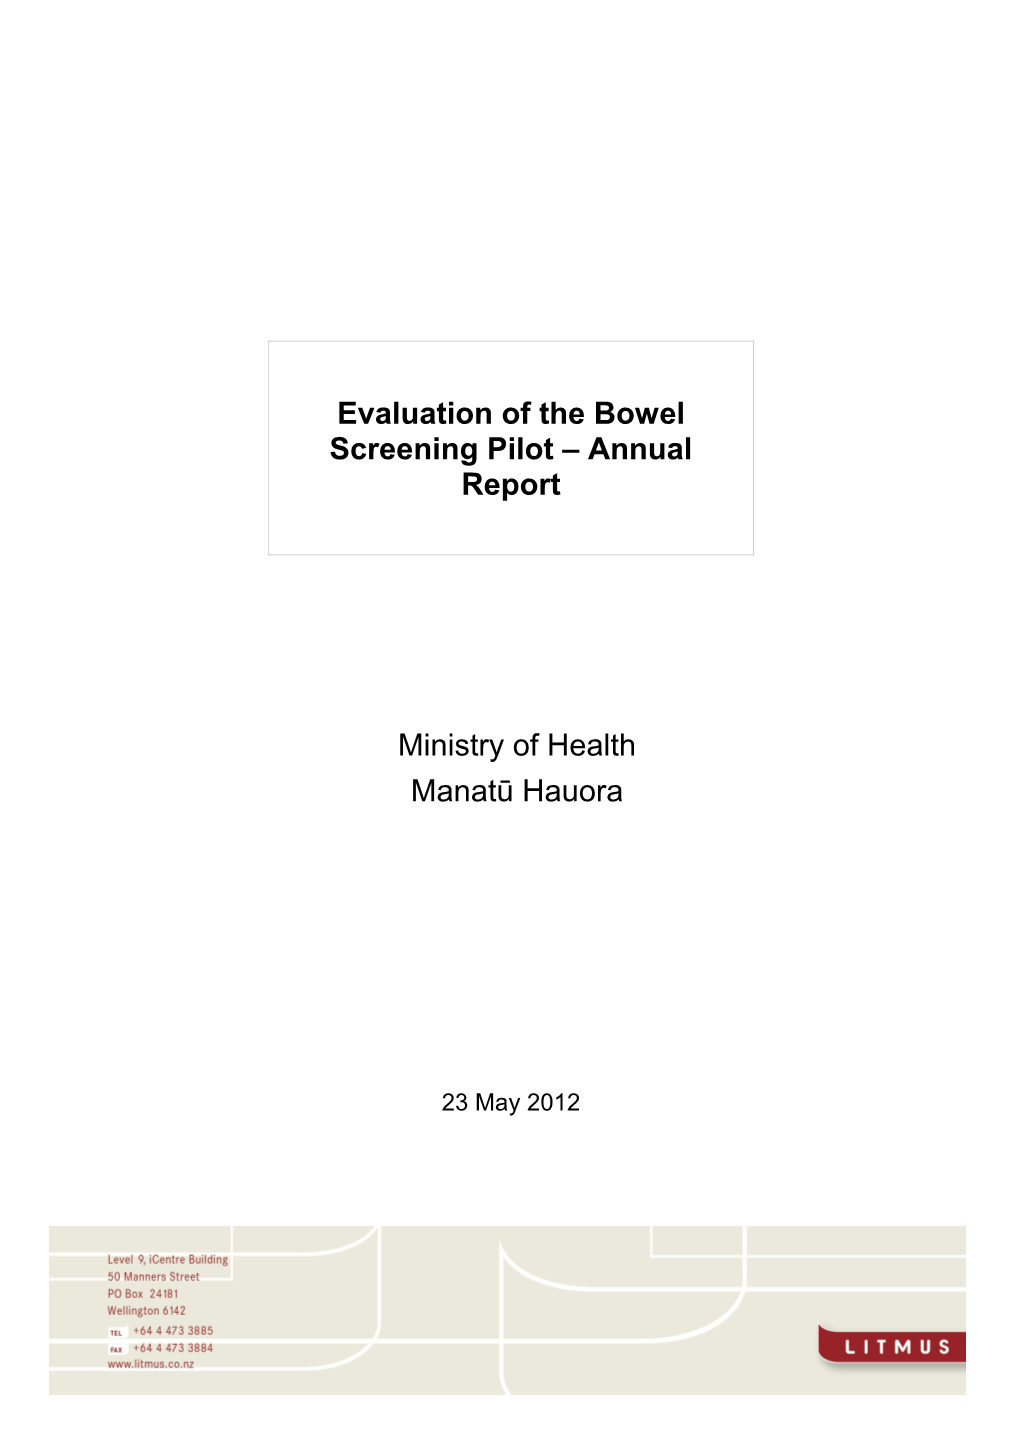 Evaluation of the Bowel Screening Pilot Annual Report